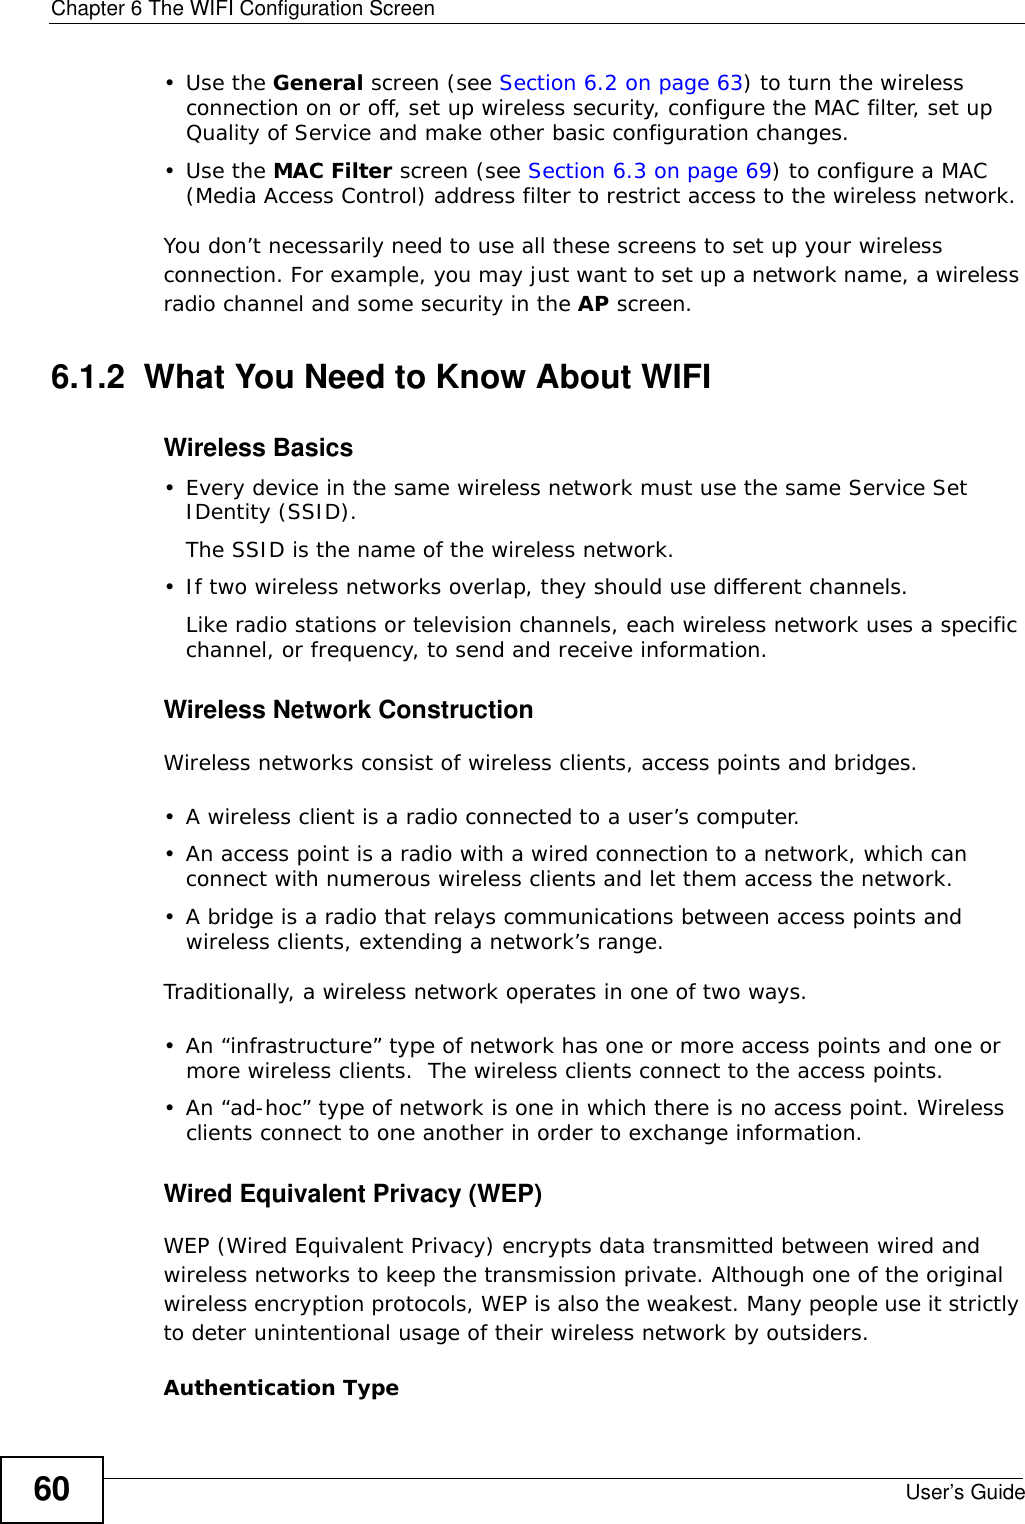 Chapter 6 The WIFI Configuration ScreenUser’s Guide60•Use the General screen (see Section 6.2 on page 63) to turn the wireless connection on or off, set up wireless security, configure the MAC filter, set up Quality of Service and make other basic configuration changes.•Use the MAC Filter screen (see Section 6.3 on page 69) to configure a MAC (Media Access Control) address filter to restrict access to the wireless network.You don’t necessarily need to use all these screens to set up your wireless connection. For example, you may just want to set up a network name, a wireless radio channel and some security in the AP screen.6.1.2  What You Need to Know About WIFIWireless Basics• Every device in the same wireless network must use the same Service Set IDentity (SSID).The SSID is the name of the wireless network.• If two wireless networks overlap, they should use different channels.Like radio stations or television channels, each wireless network uses a specific channel, or frequency, to send and receive information.Wireless Network ConstructionWireless networks consist of wireless clients, access points and bridges. • A wireless client is a radio connected to a user’s computer. • An access point is a radio with a wired connection to a network, which can connect with numerous wireless clients and let them access the network. • A bridge is a radio that relays communications between access points and wireless clients, extending a network’s range. Traditionally, a wireless network operates in one of two ways.• An “infrastructure” type of network has one or more access points and one or more wireless clients.  The wireless clients connect to the access points.• An “ad-hoc” type of network is one in which there is no access point. Wireless clients connect to one another in order to exchange information.Wired Equivalent Privacy (WEP)WEP (Wired Equivalent Privacy) encrypts data transmitted between wired and wireless networks to keep the transmission private. Although one of the original wireless encryption protocols, WEP is also the weakest. Many people use it strictly to deter unintentional usage of their wireless network by outsiders.Authentication Type 